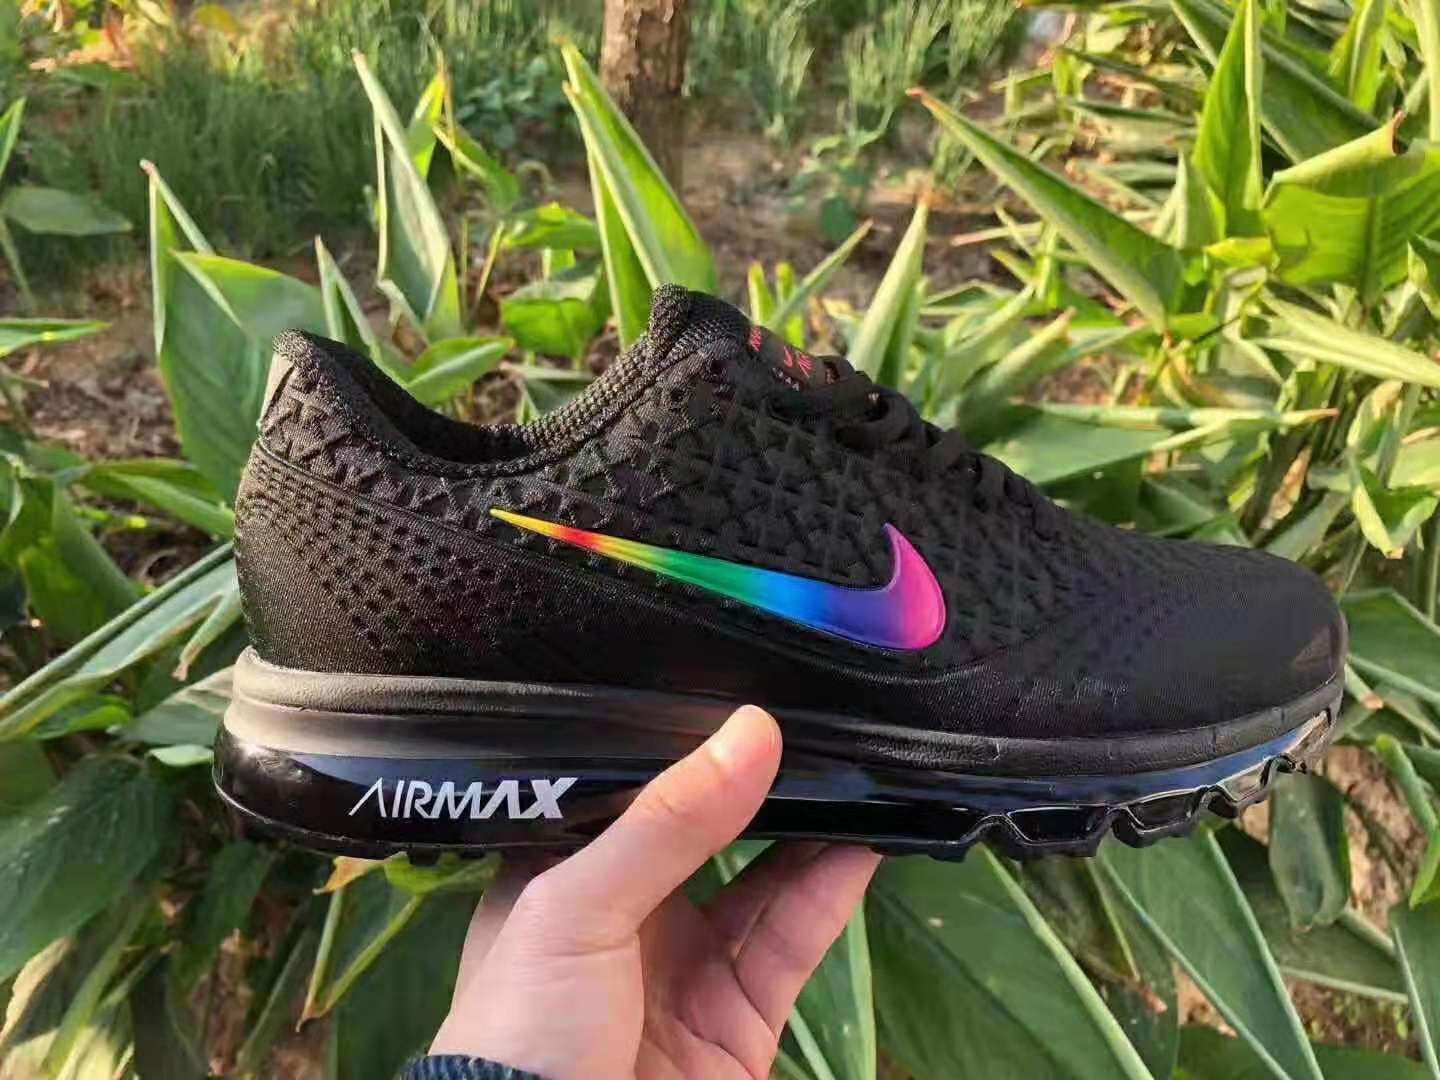 Men's Hot sale Running weapon Nike Air Max 2019 Shoes 092